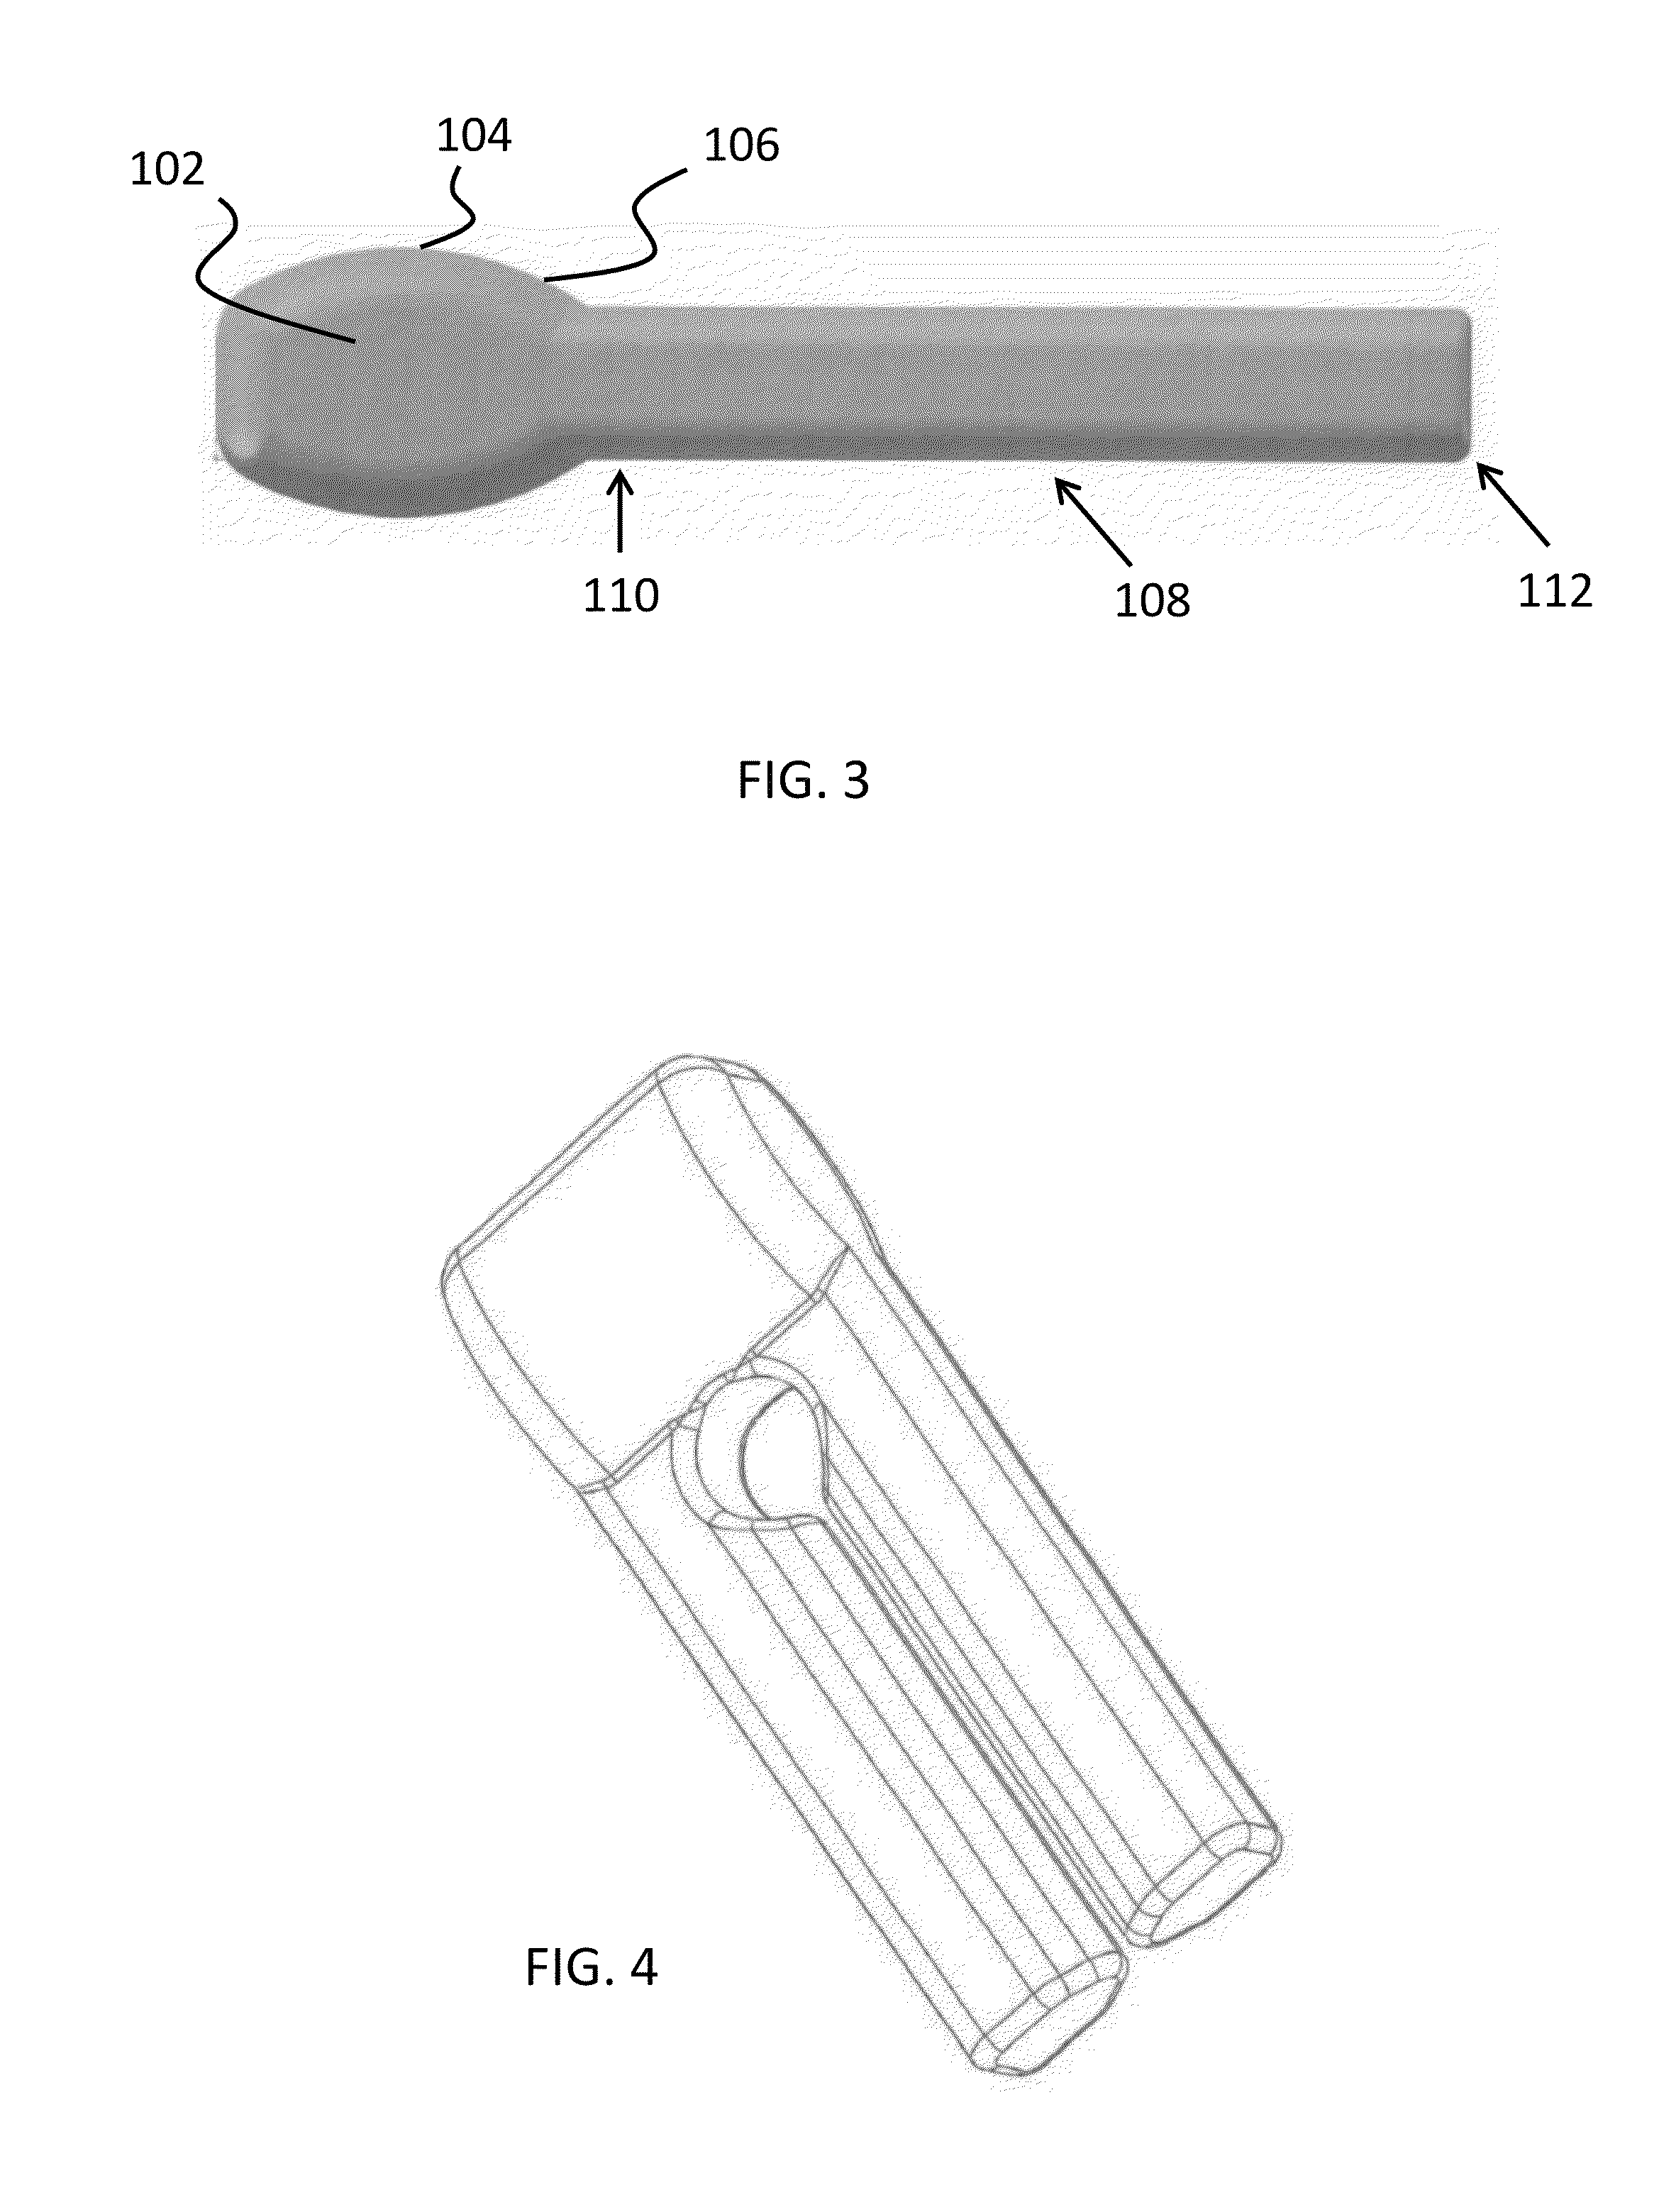 Orthopedic support device